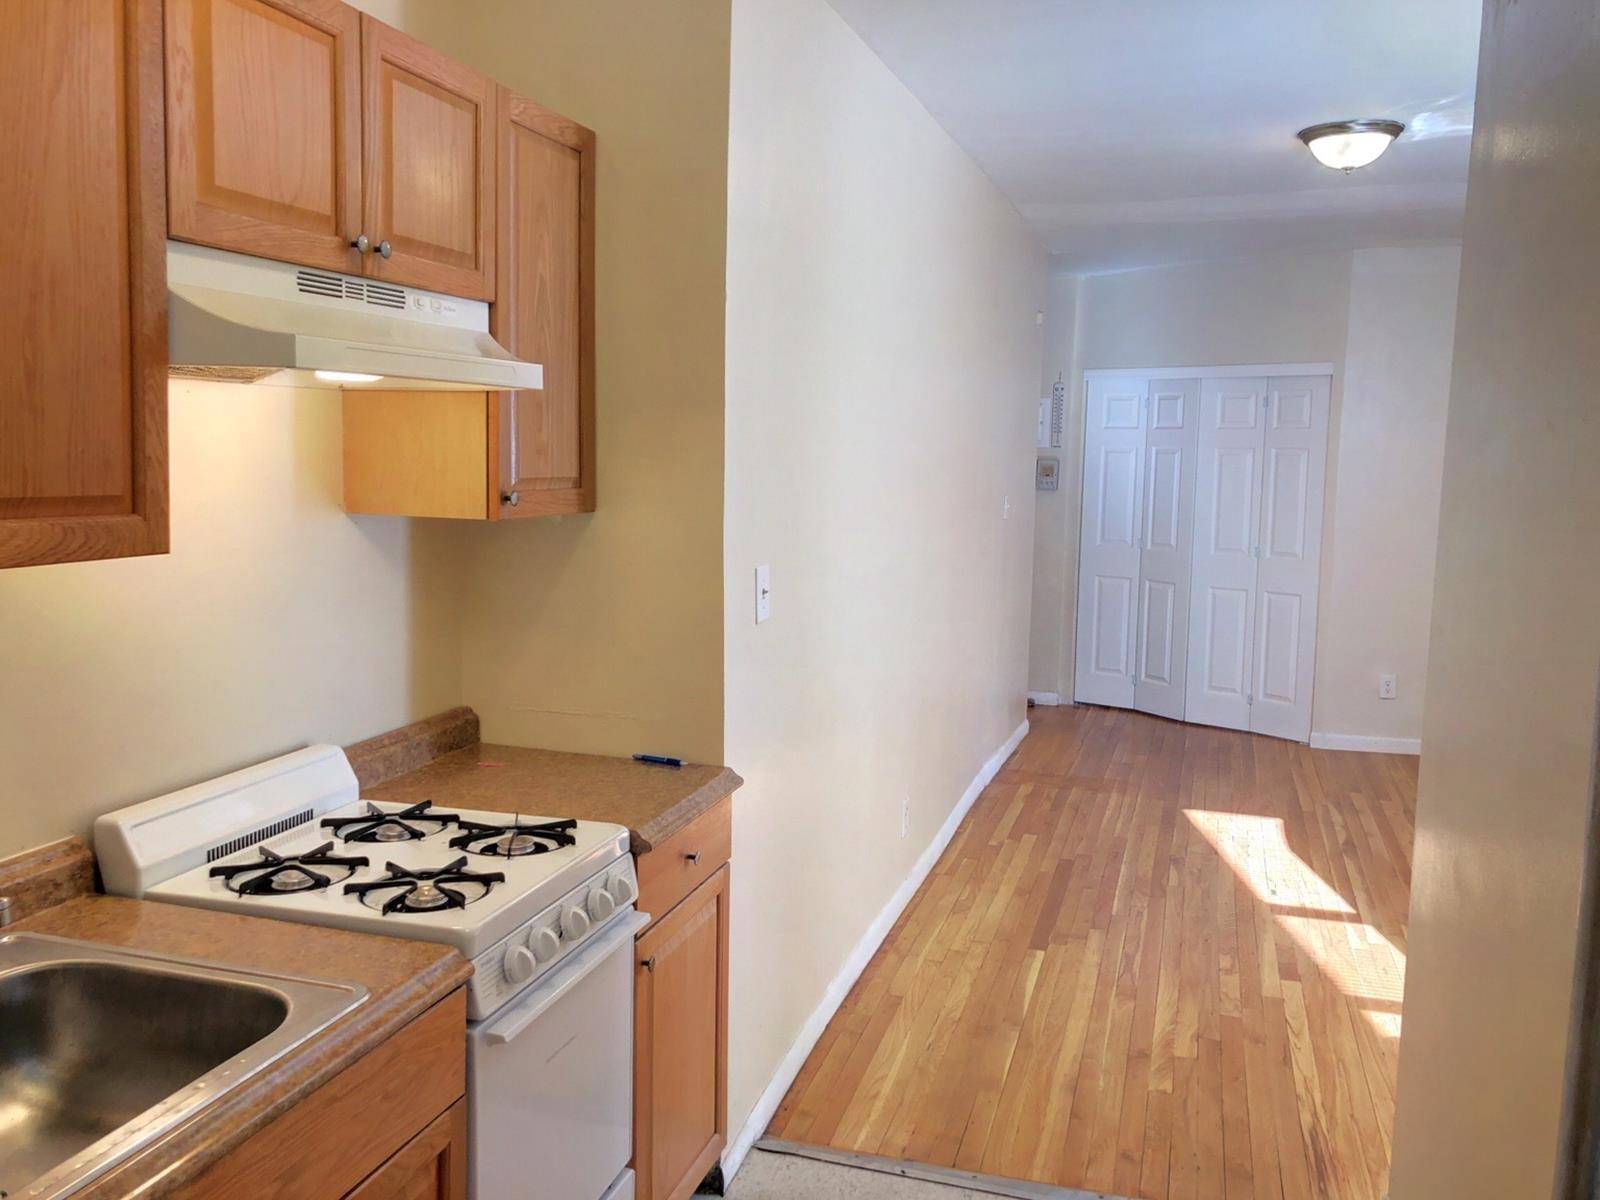 Renovated one bedroom with new kitchen and bath.